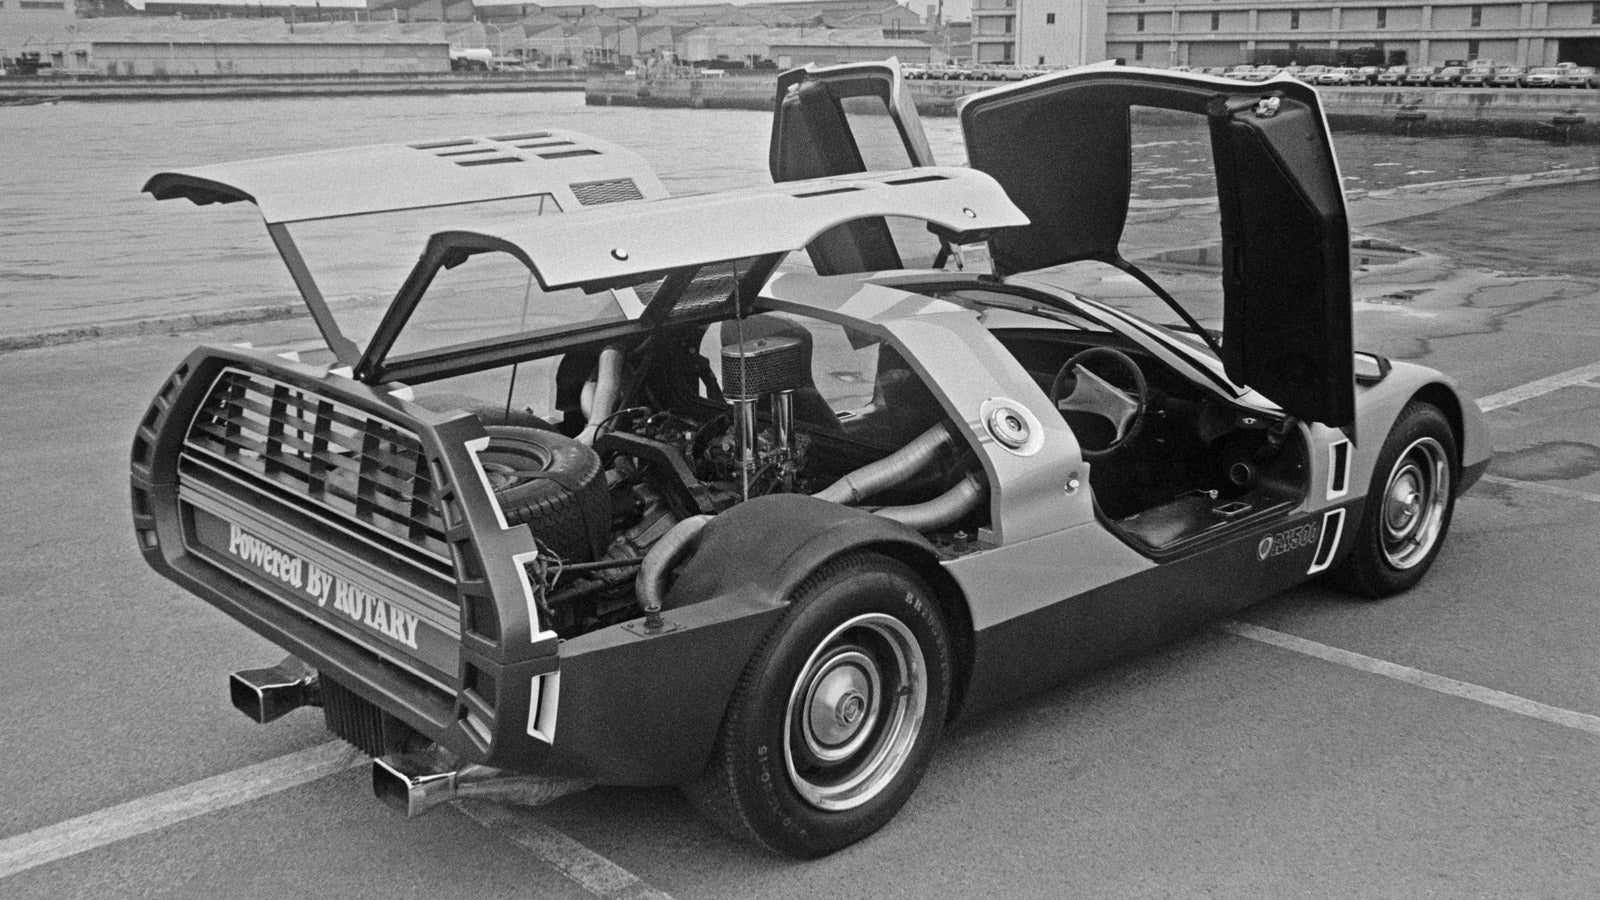 And Now, Mazda’s F*cked up Bubble Car From the 1970s